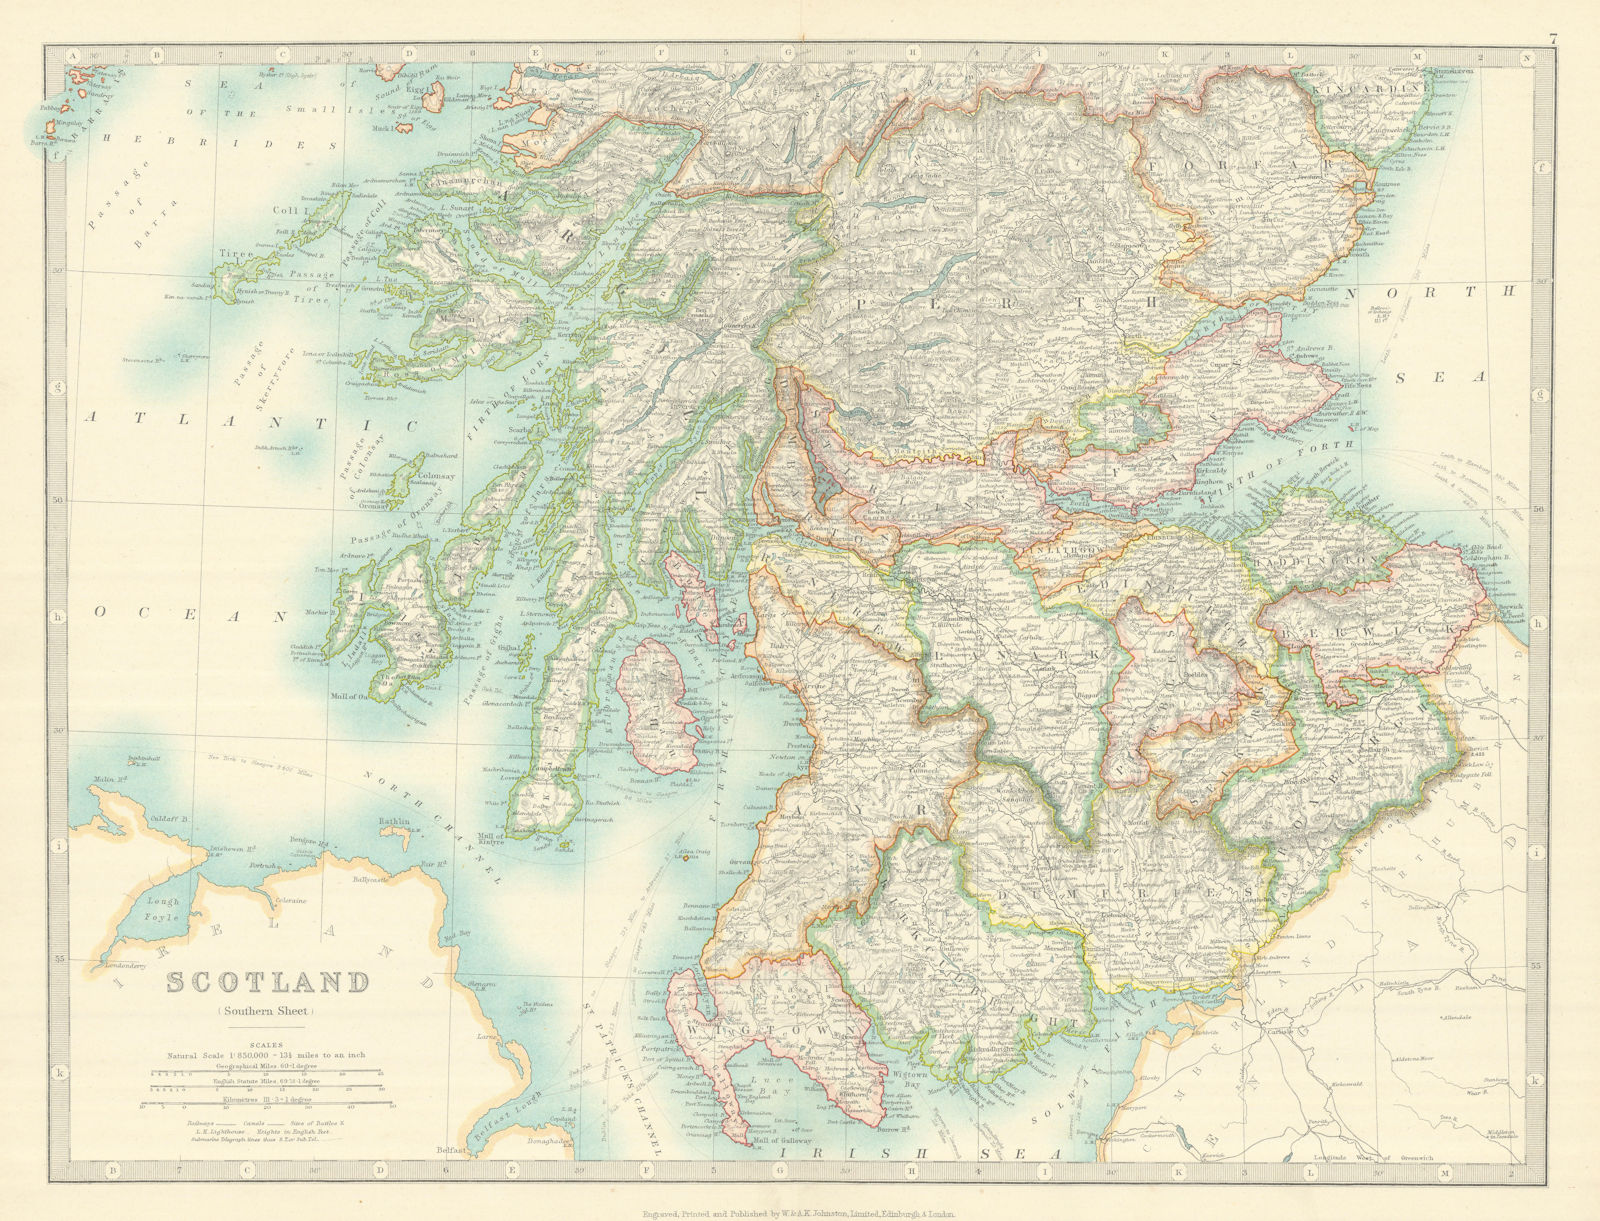 Associate Product SOUTHERN SCOTLAND showing battlefields and dates. JOHNSTON 1913 old map